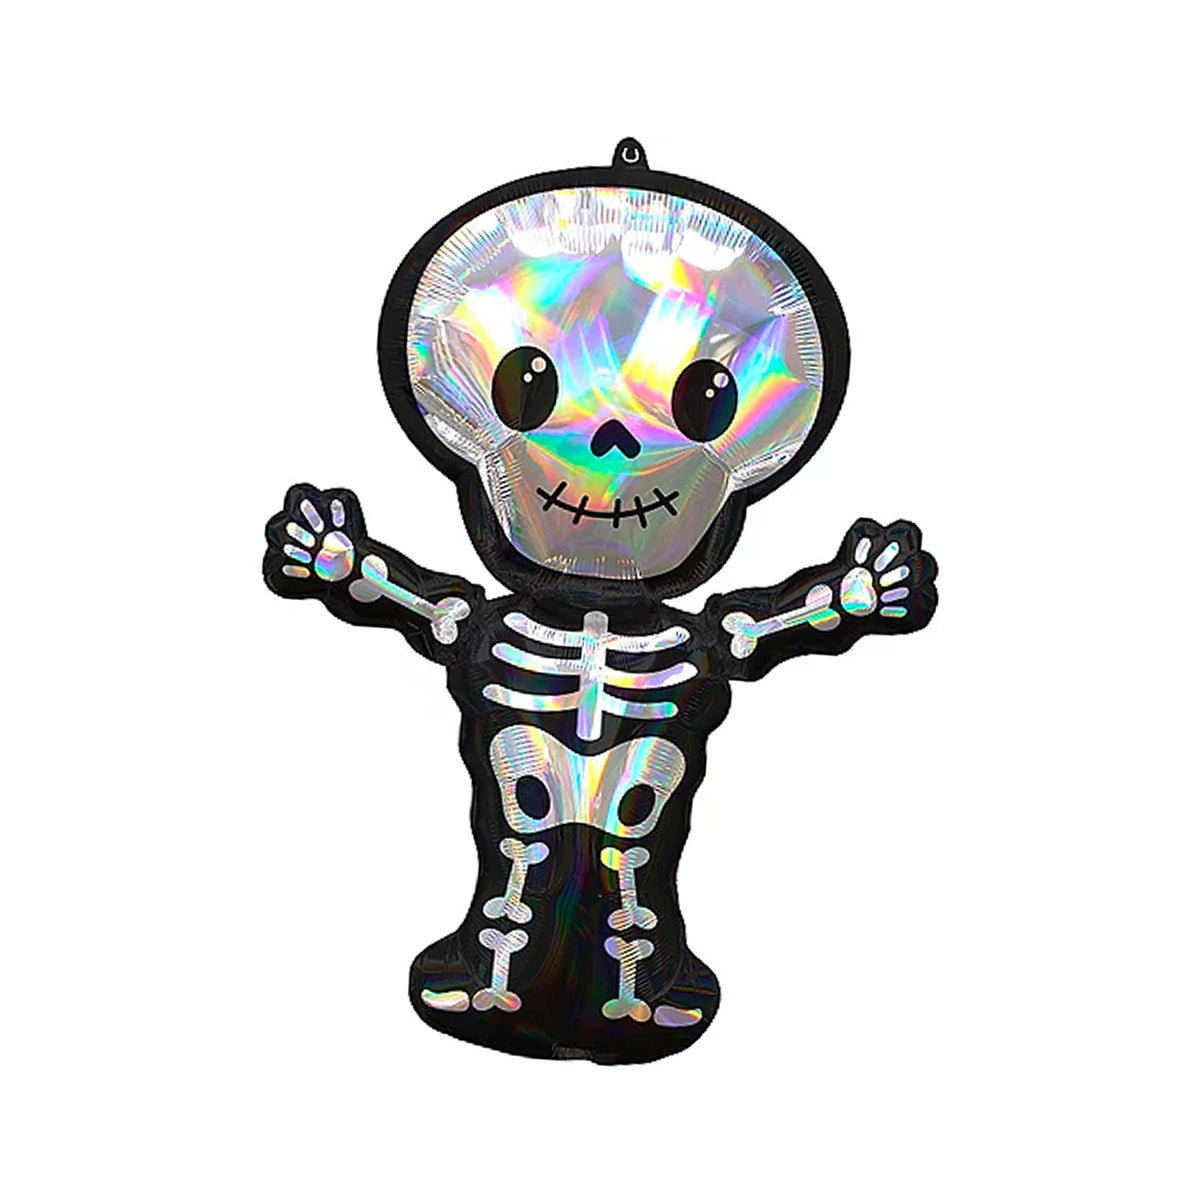 34 Inches Giant Iridescent Cute Skeleton Balloon - Halloween Party Decoration - Ellie's Party Supply